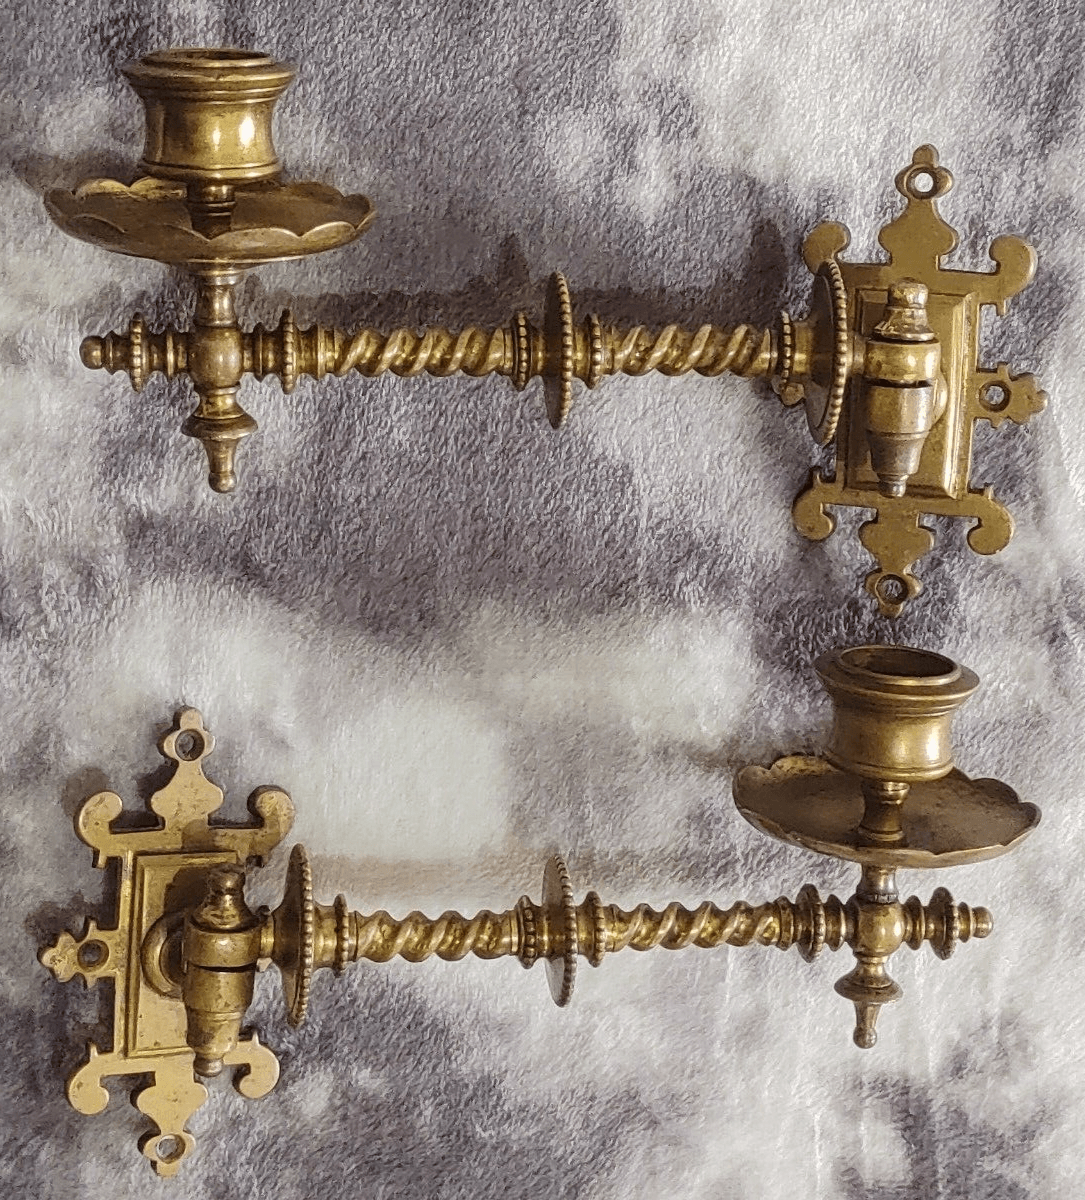 Pair of Antique Gothic Revival Brass Barley Twist Piano Candle Holder Wall Sconces - Tommy's Treasure